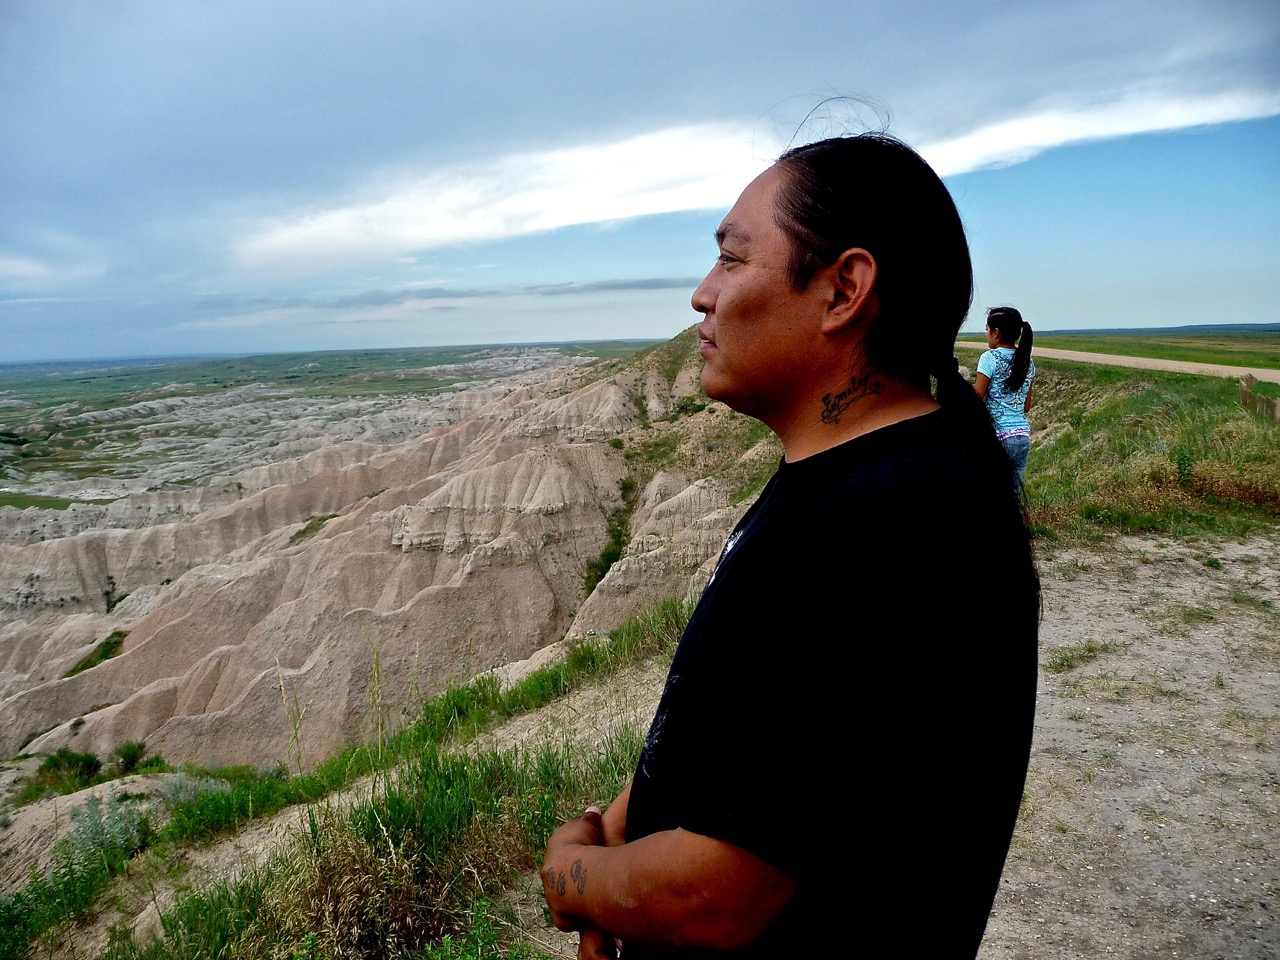 Mike having some quiet thoughts, The Badlands, South Dakota, USA, 2011.